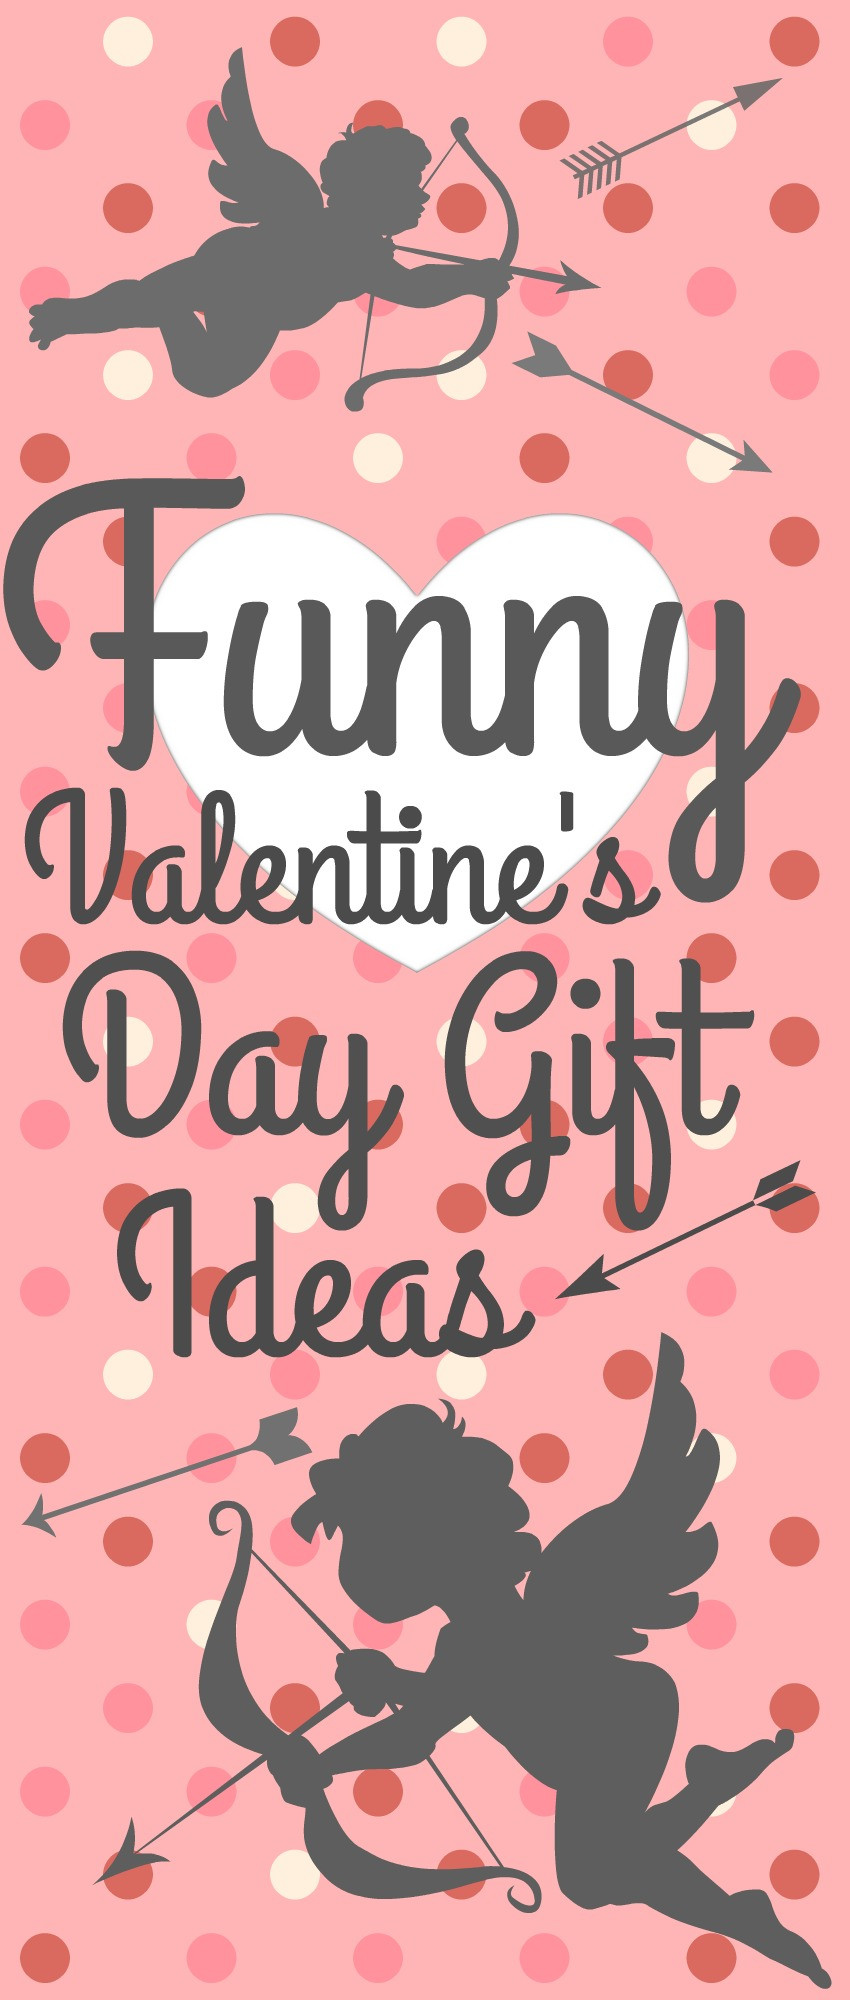 Valentines Day Photo Gift Ideas
 Funny Valentine s Day Gifts